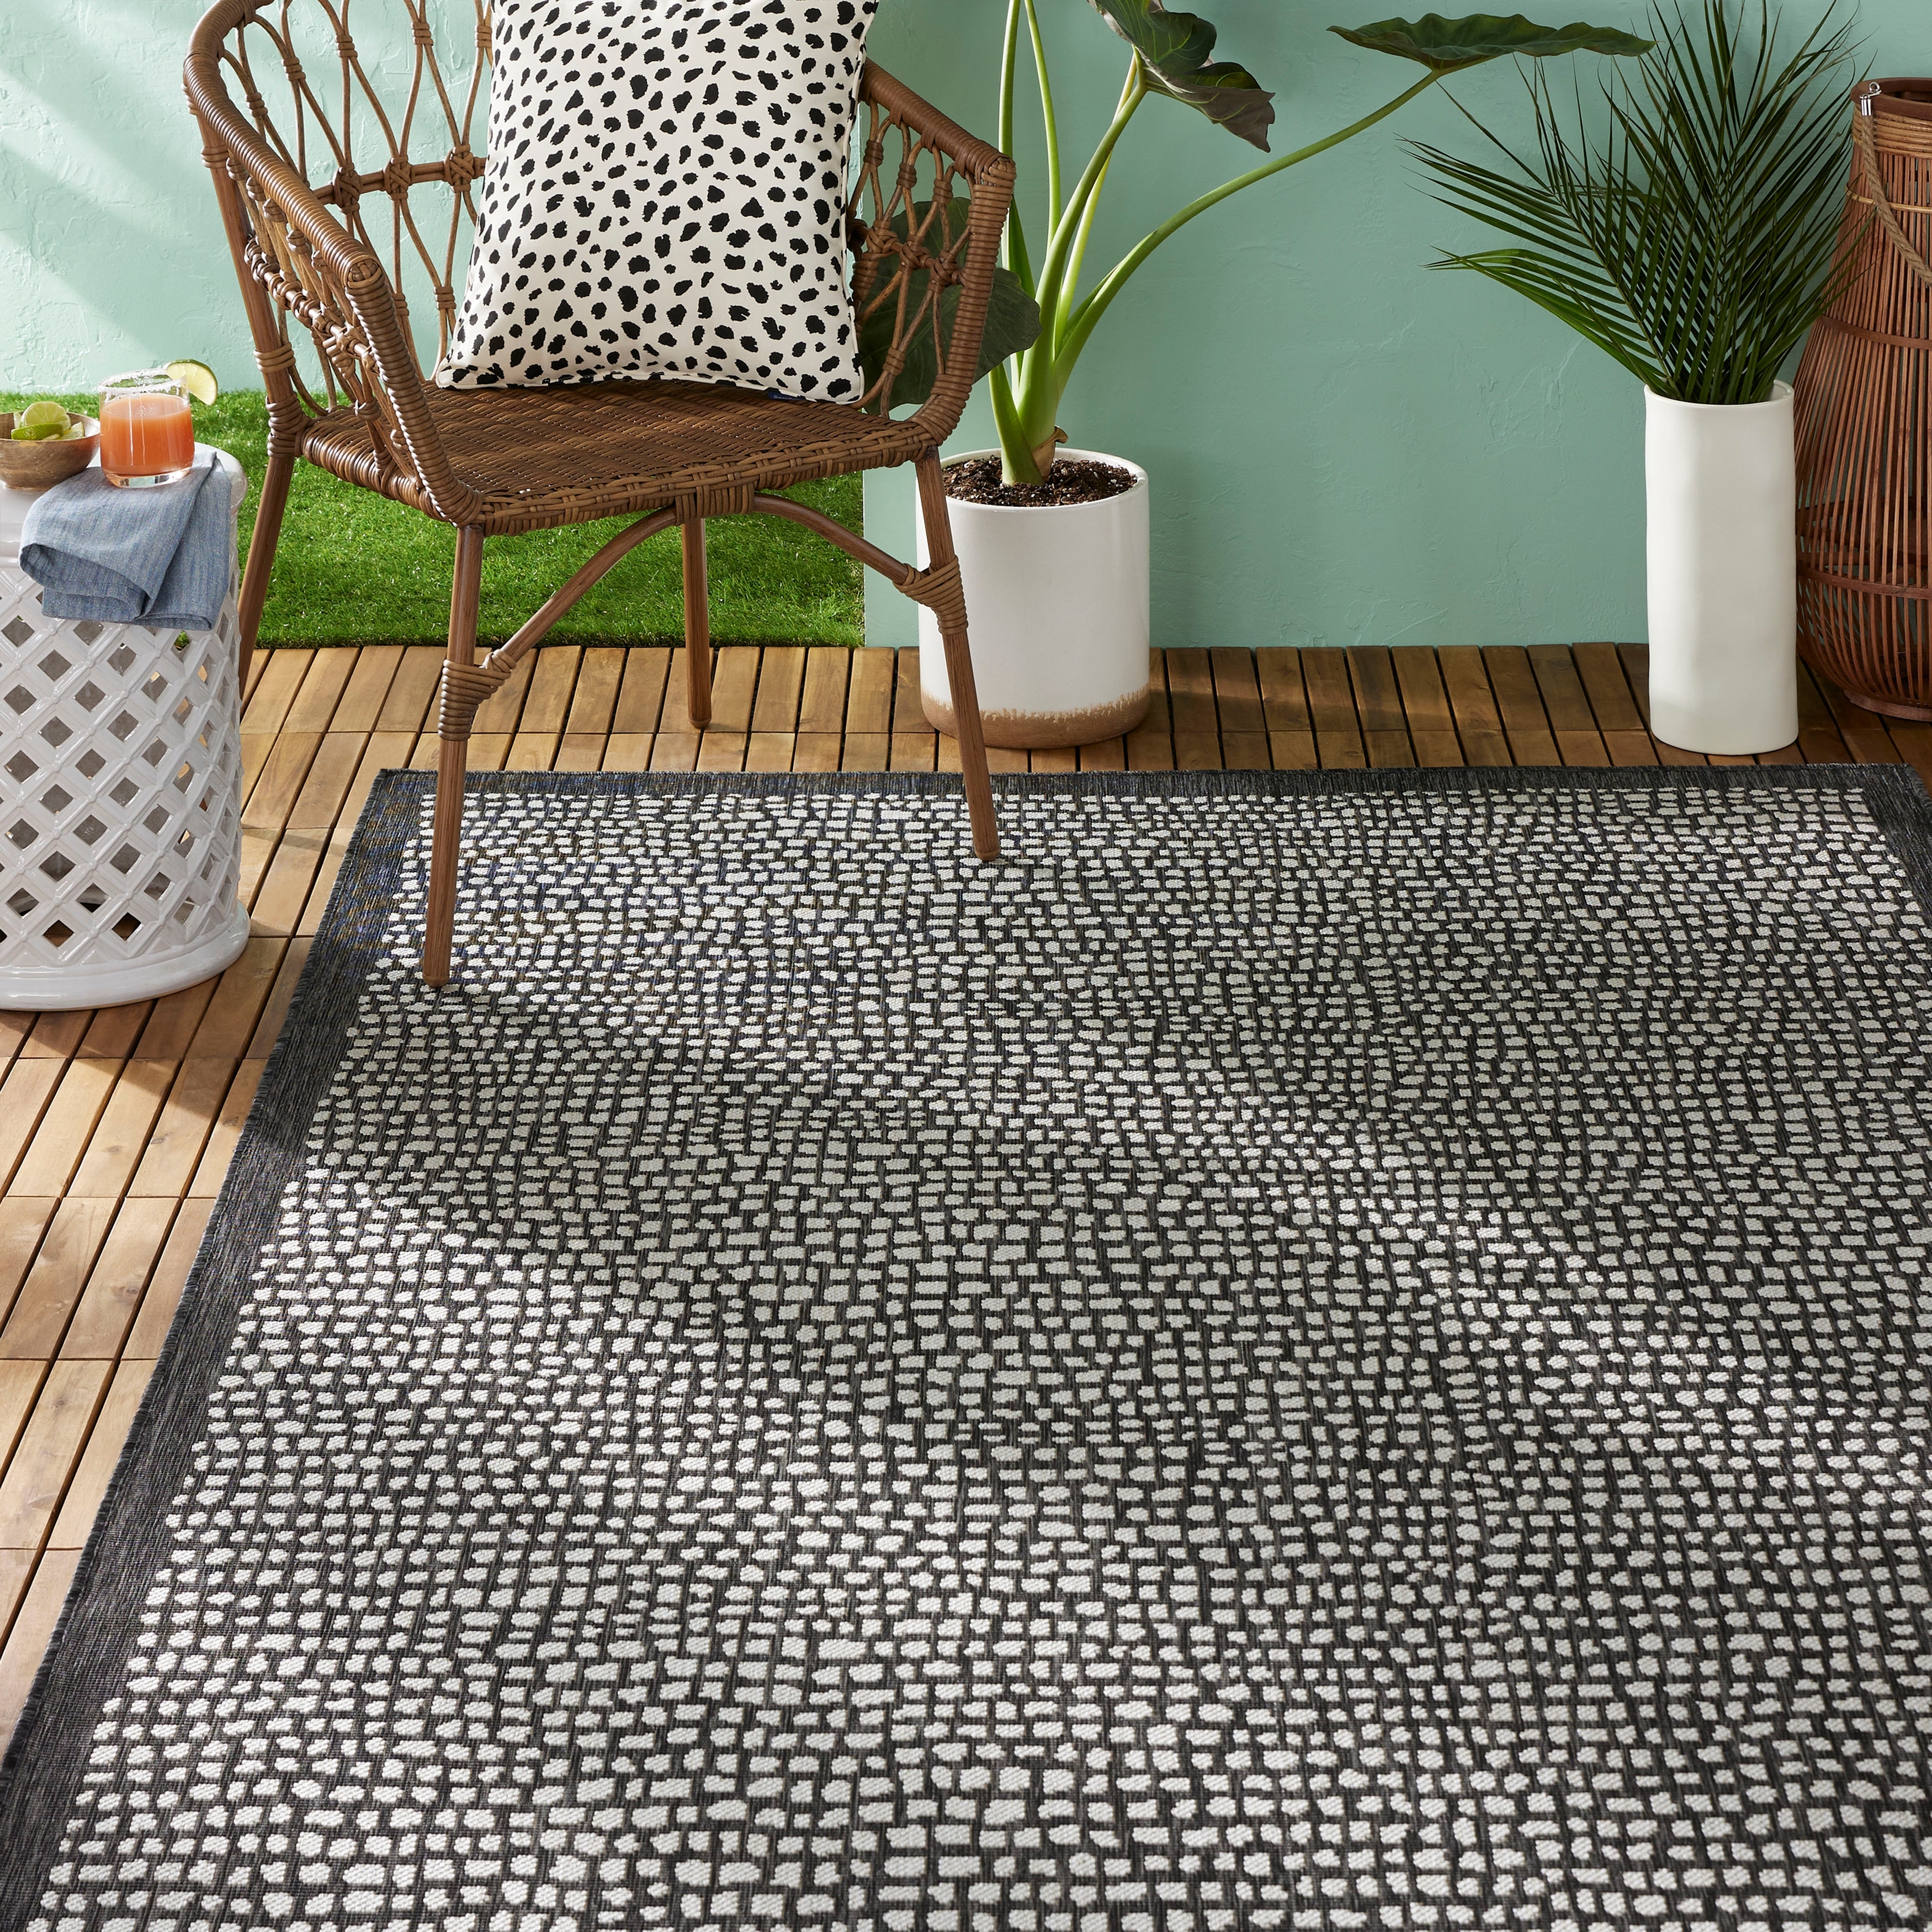 Buy Outdoor Area Rugs Online at Overstock | Our Best Rugs Deals